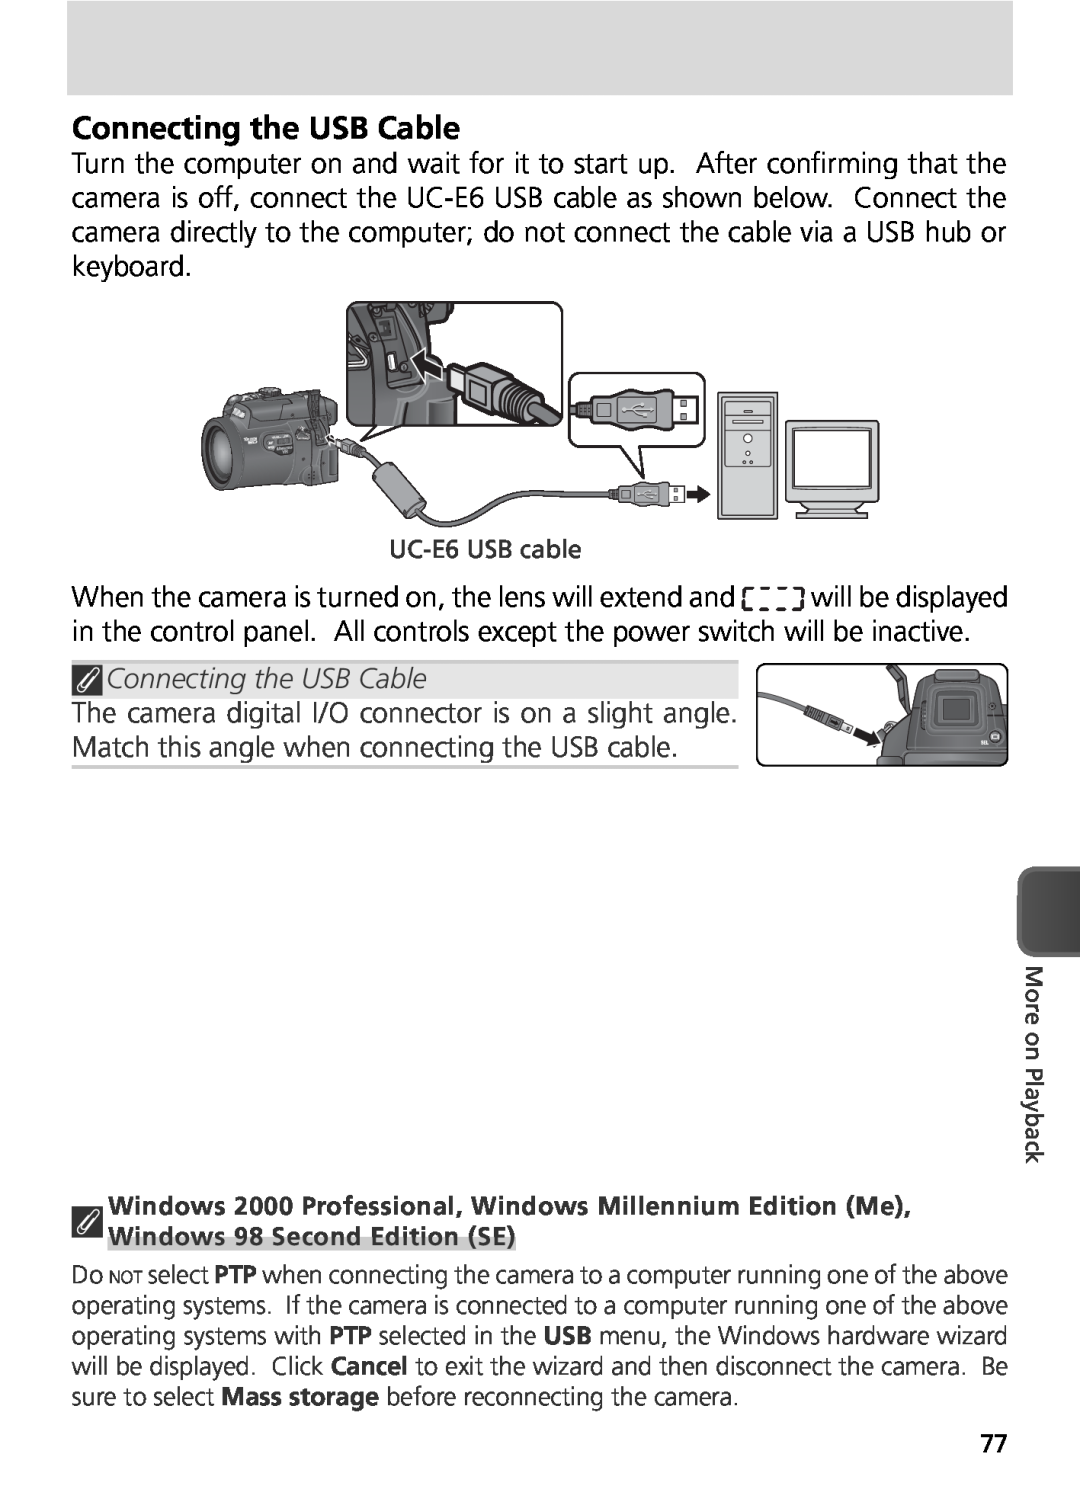 Nikon COOLPIX8800 manual Connecting the USB Cable, The camera digital I/O connector is on a slight angle, More on Playback 